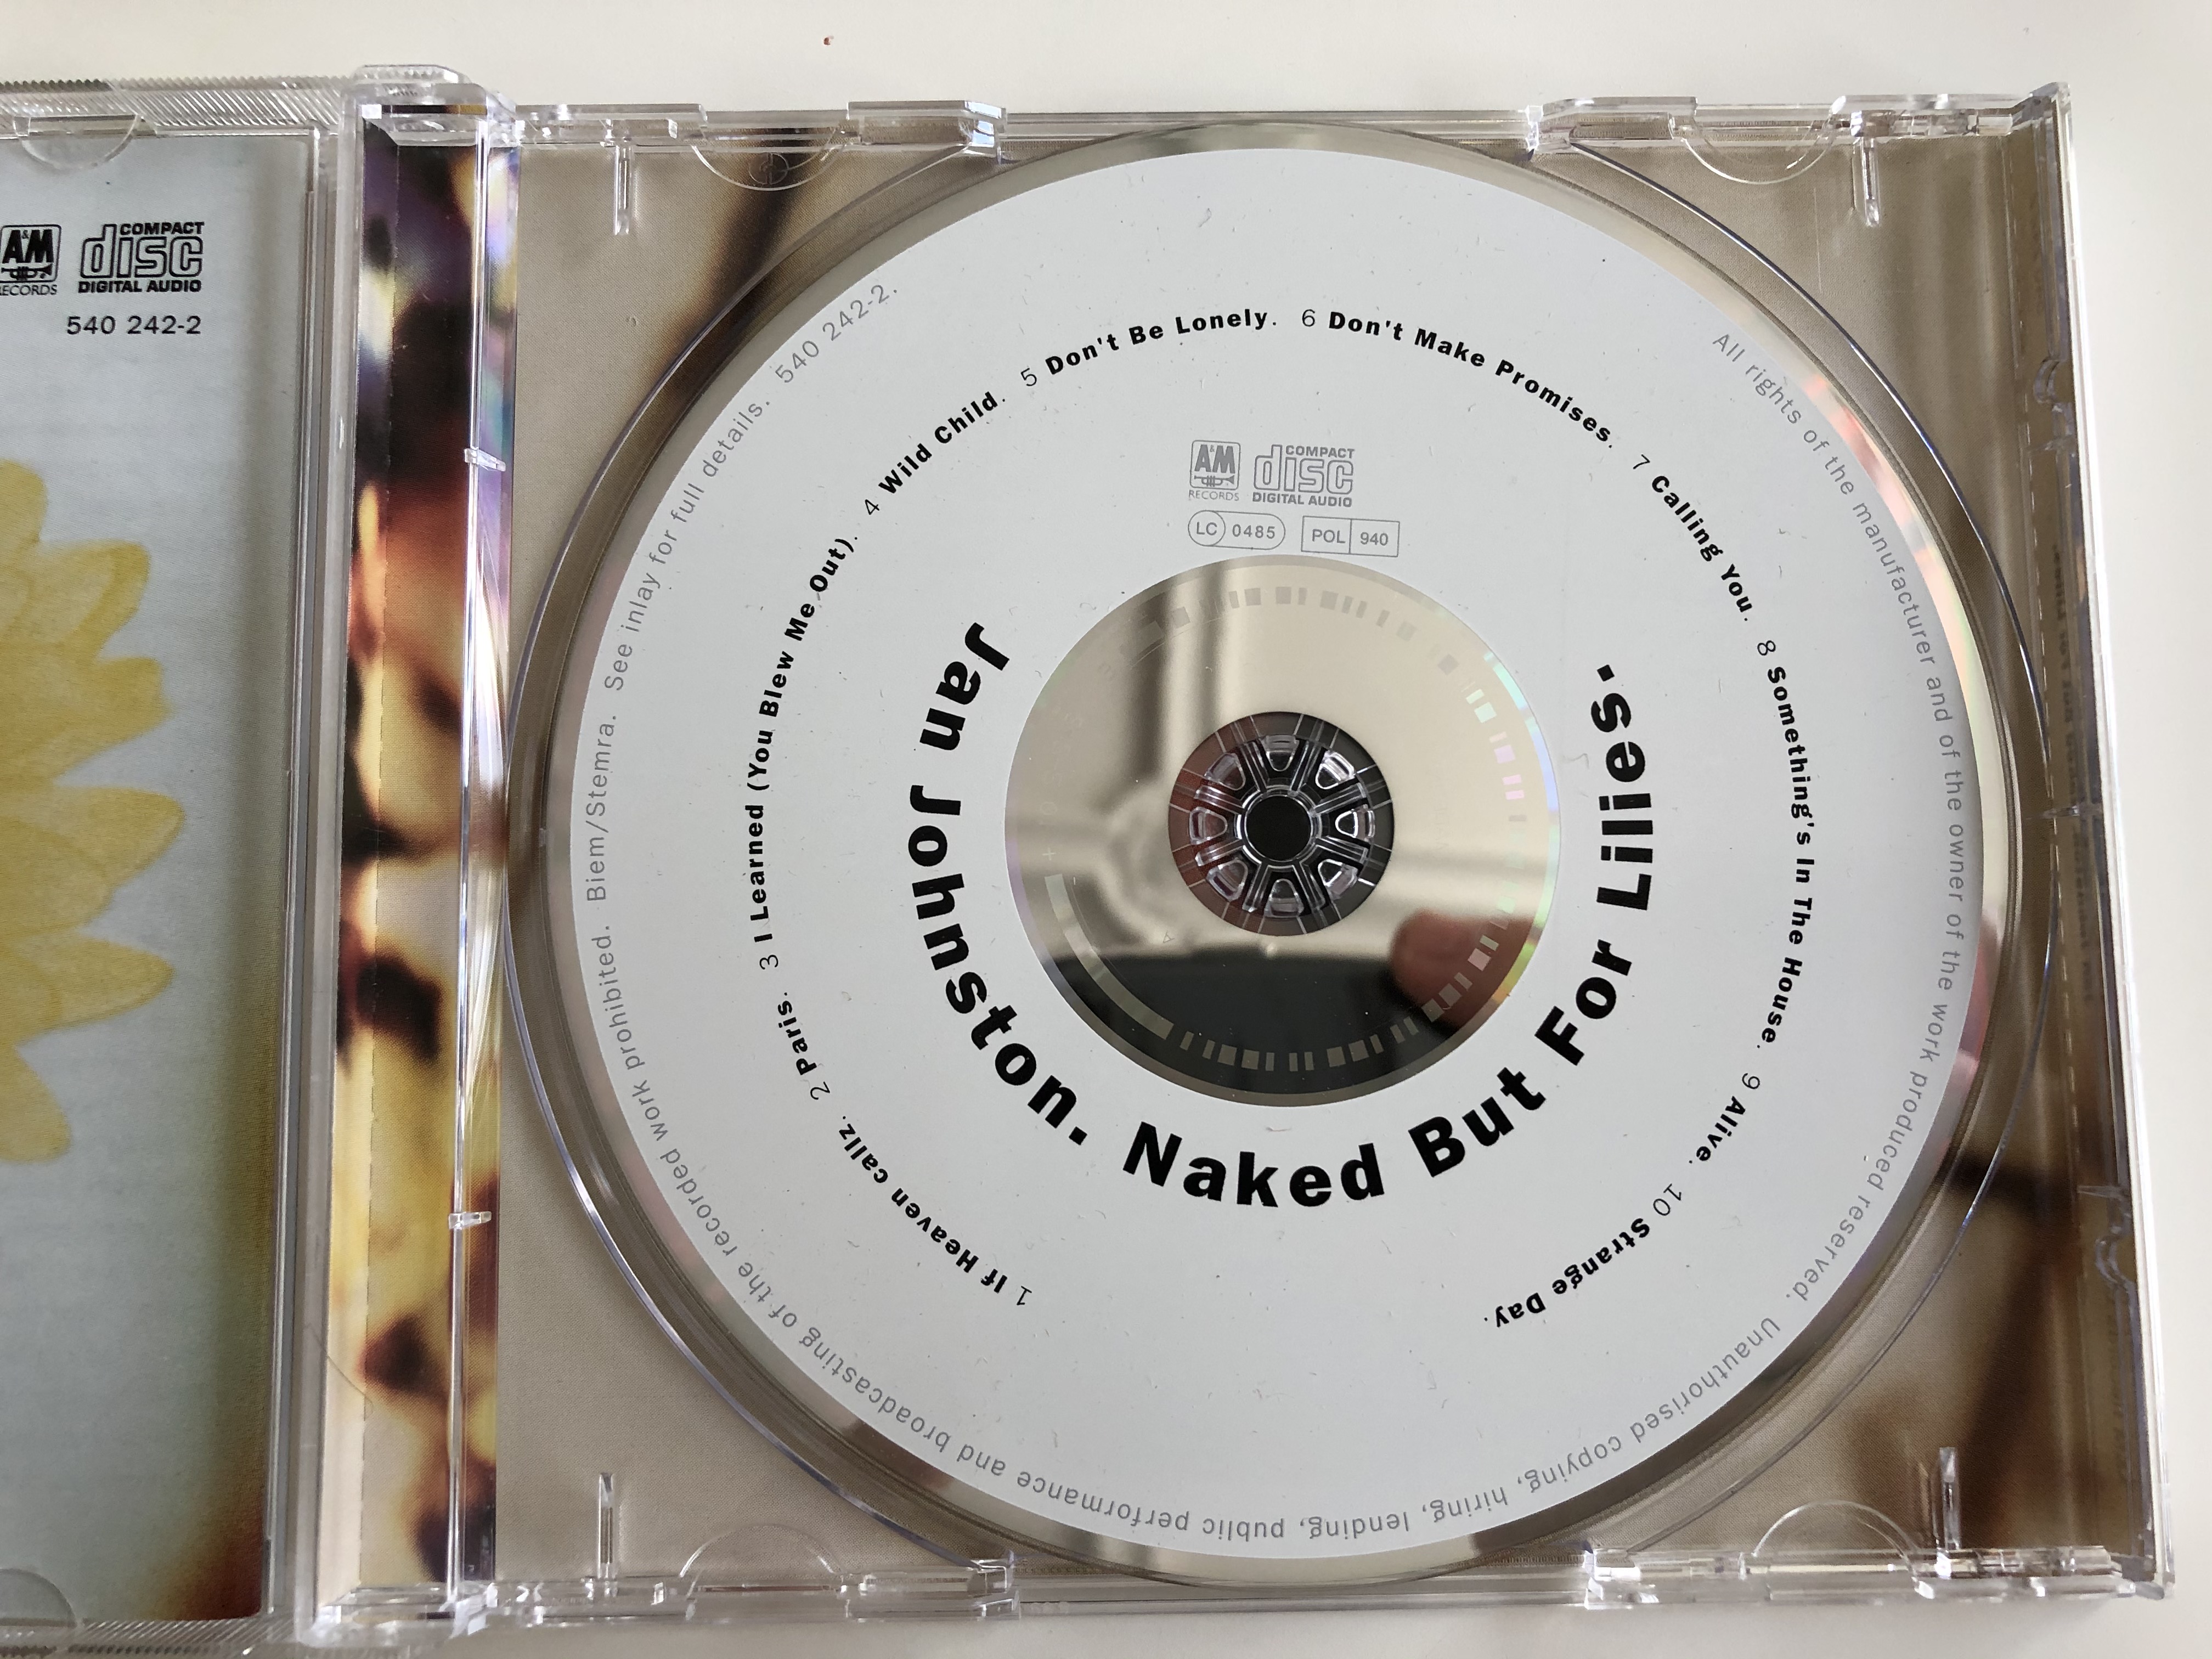 jan-johnston-naked-but-for-lilies.-a-m-records-audio-cd-1994-540-242-2-6-.jpg